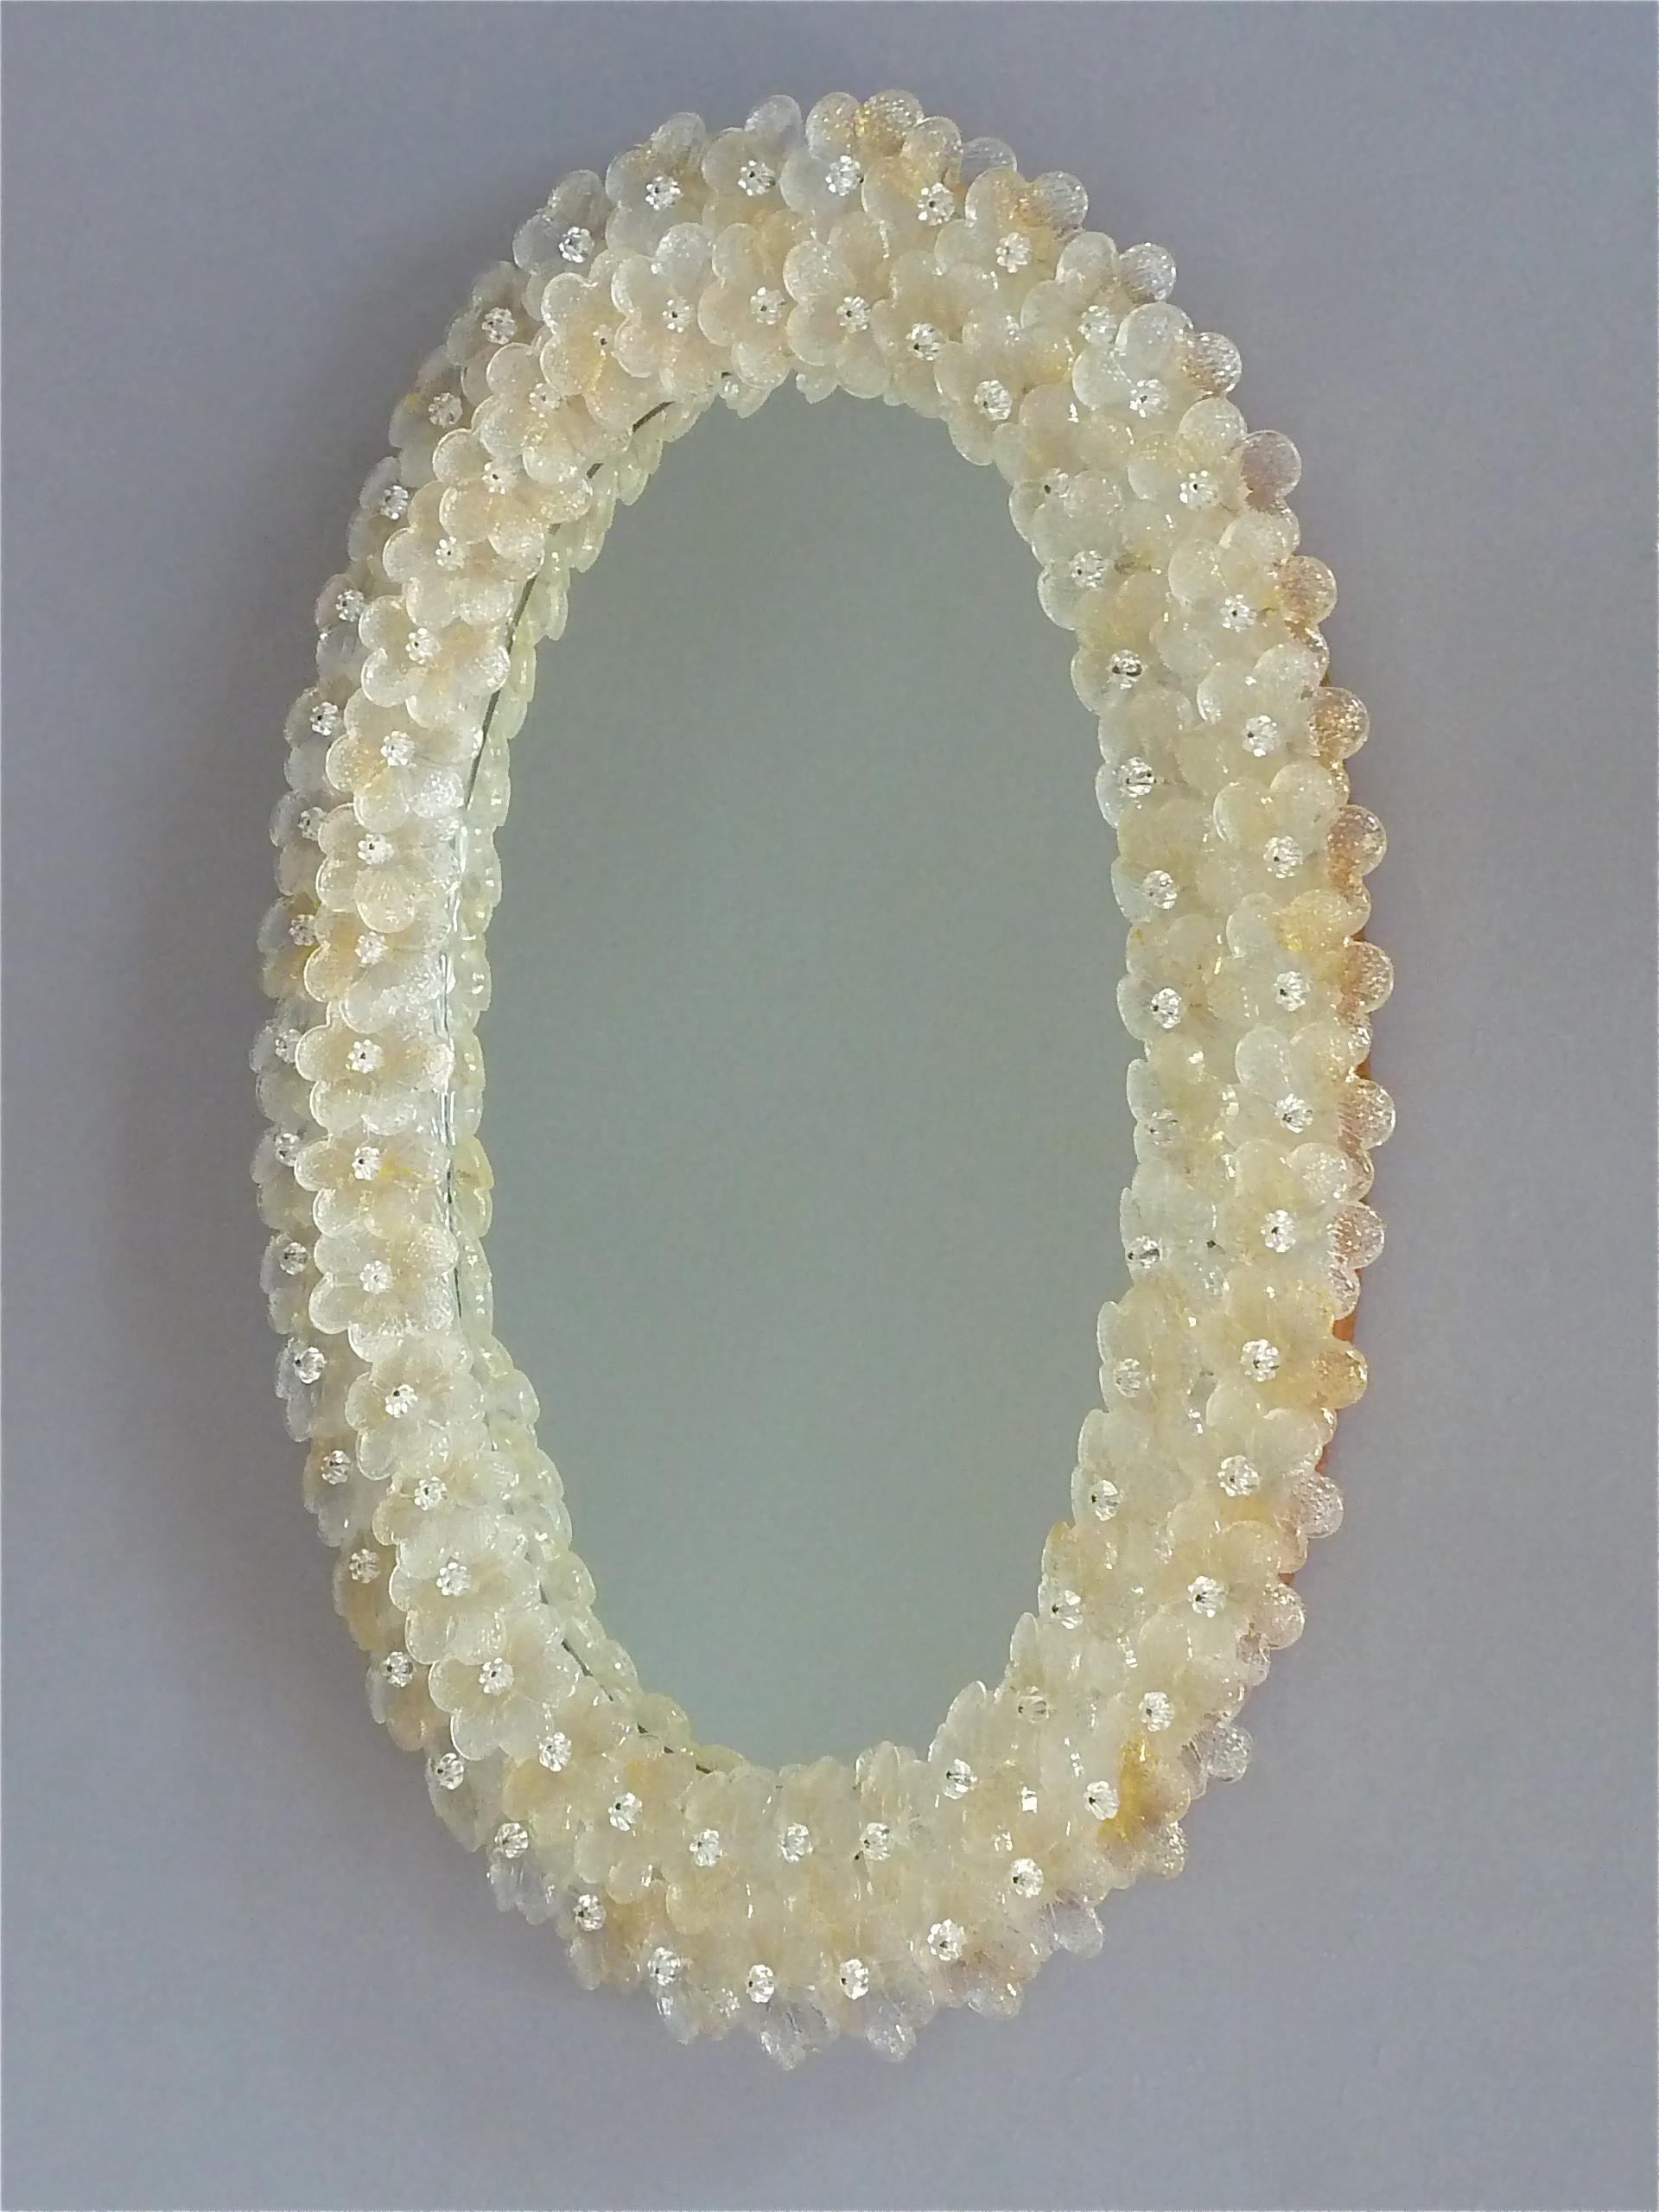 Hand-Crafted Midcentury Seguso Oval Mirror Murano Glass Flowers Golden Clear, Italian, 1950s